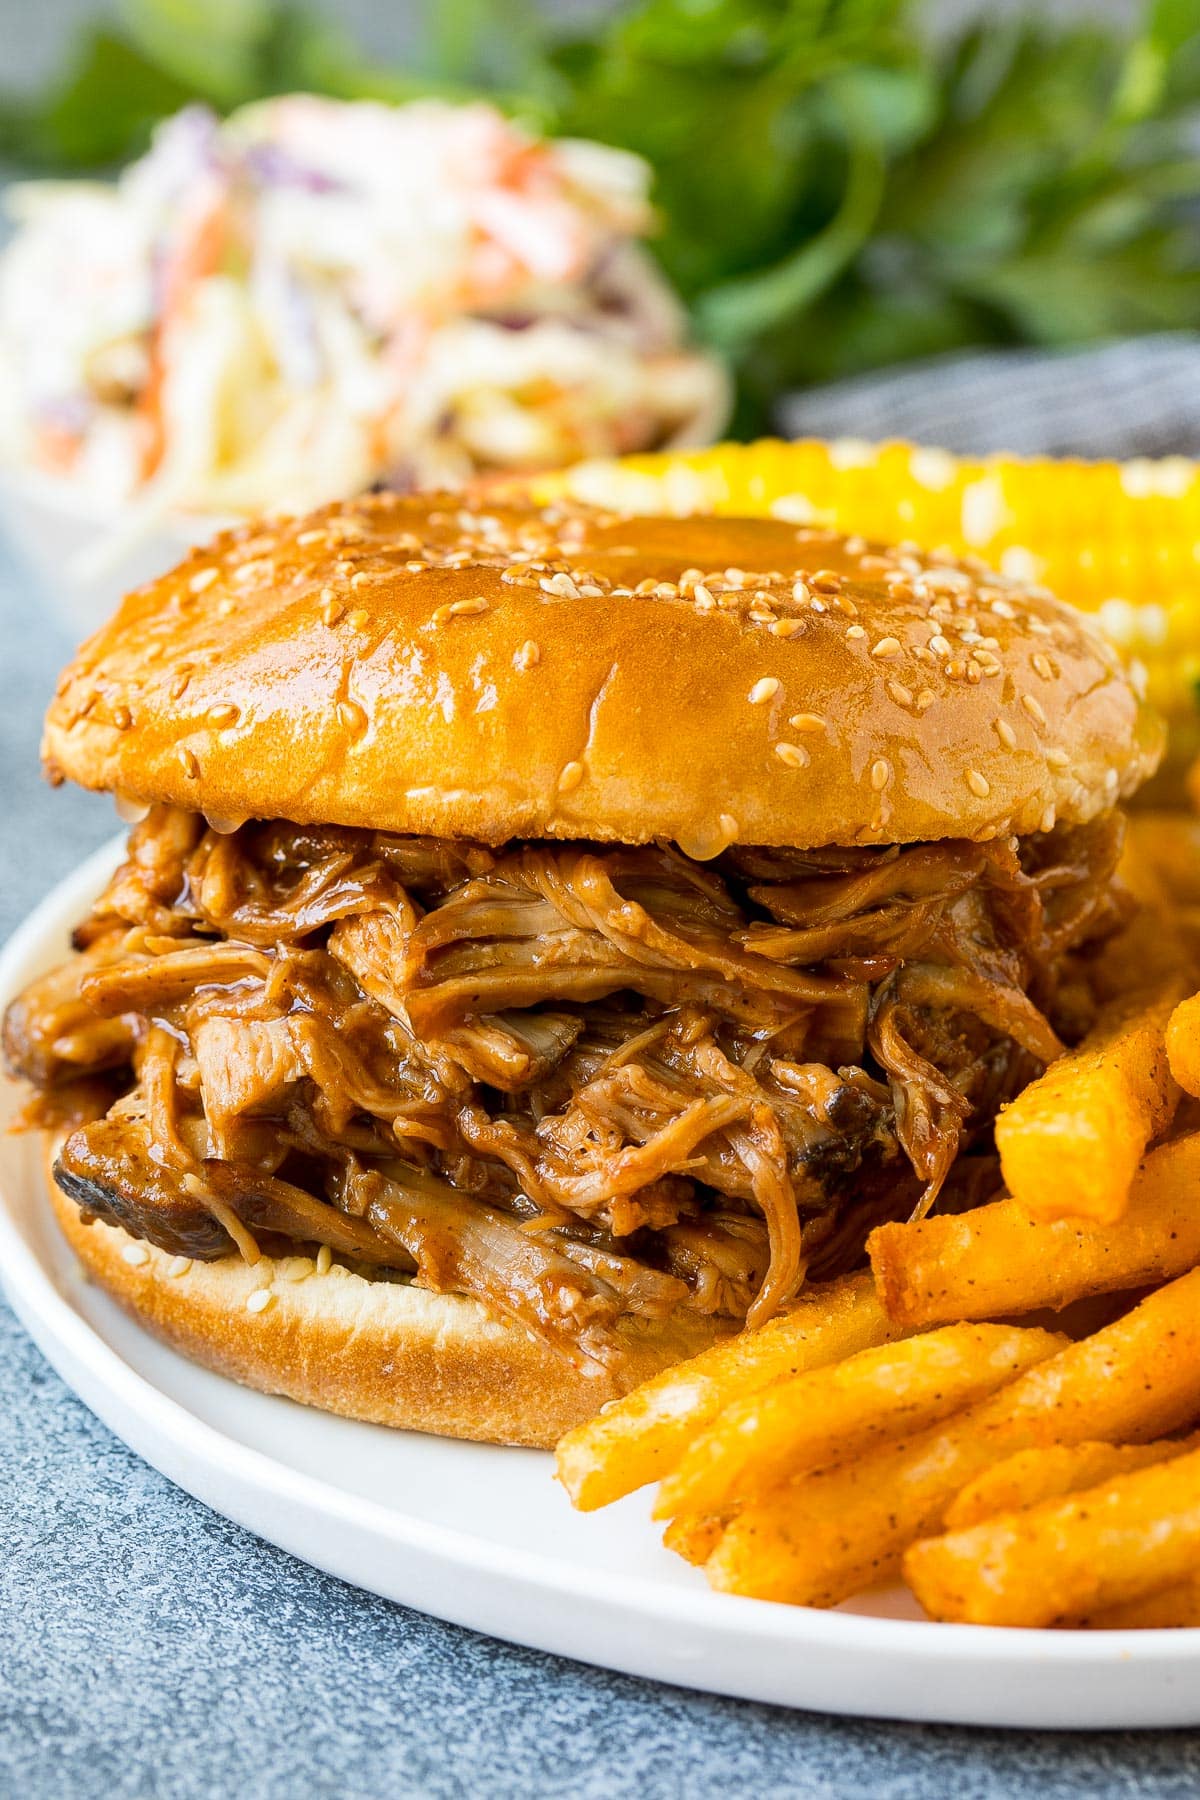 A smoked pulled pork sandwich served with french fries.